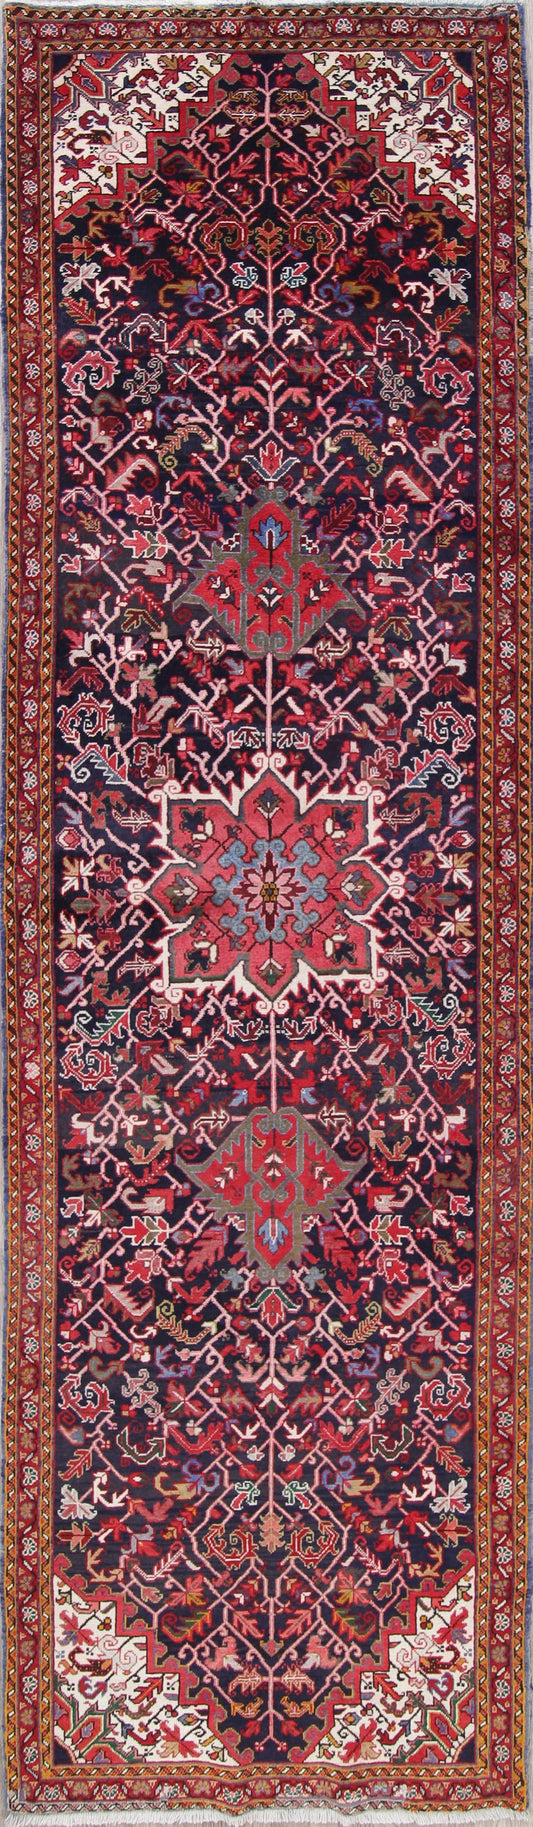 One of a Kind Geometric Heriz Persian Hand-Knotted 4x12 Wool Runner Rug